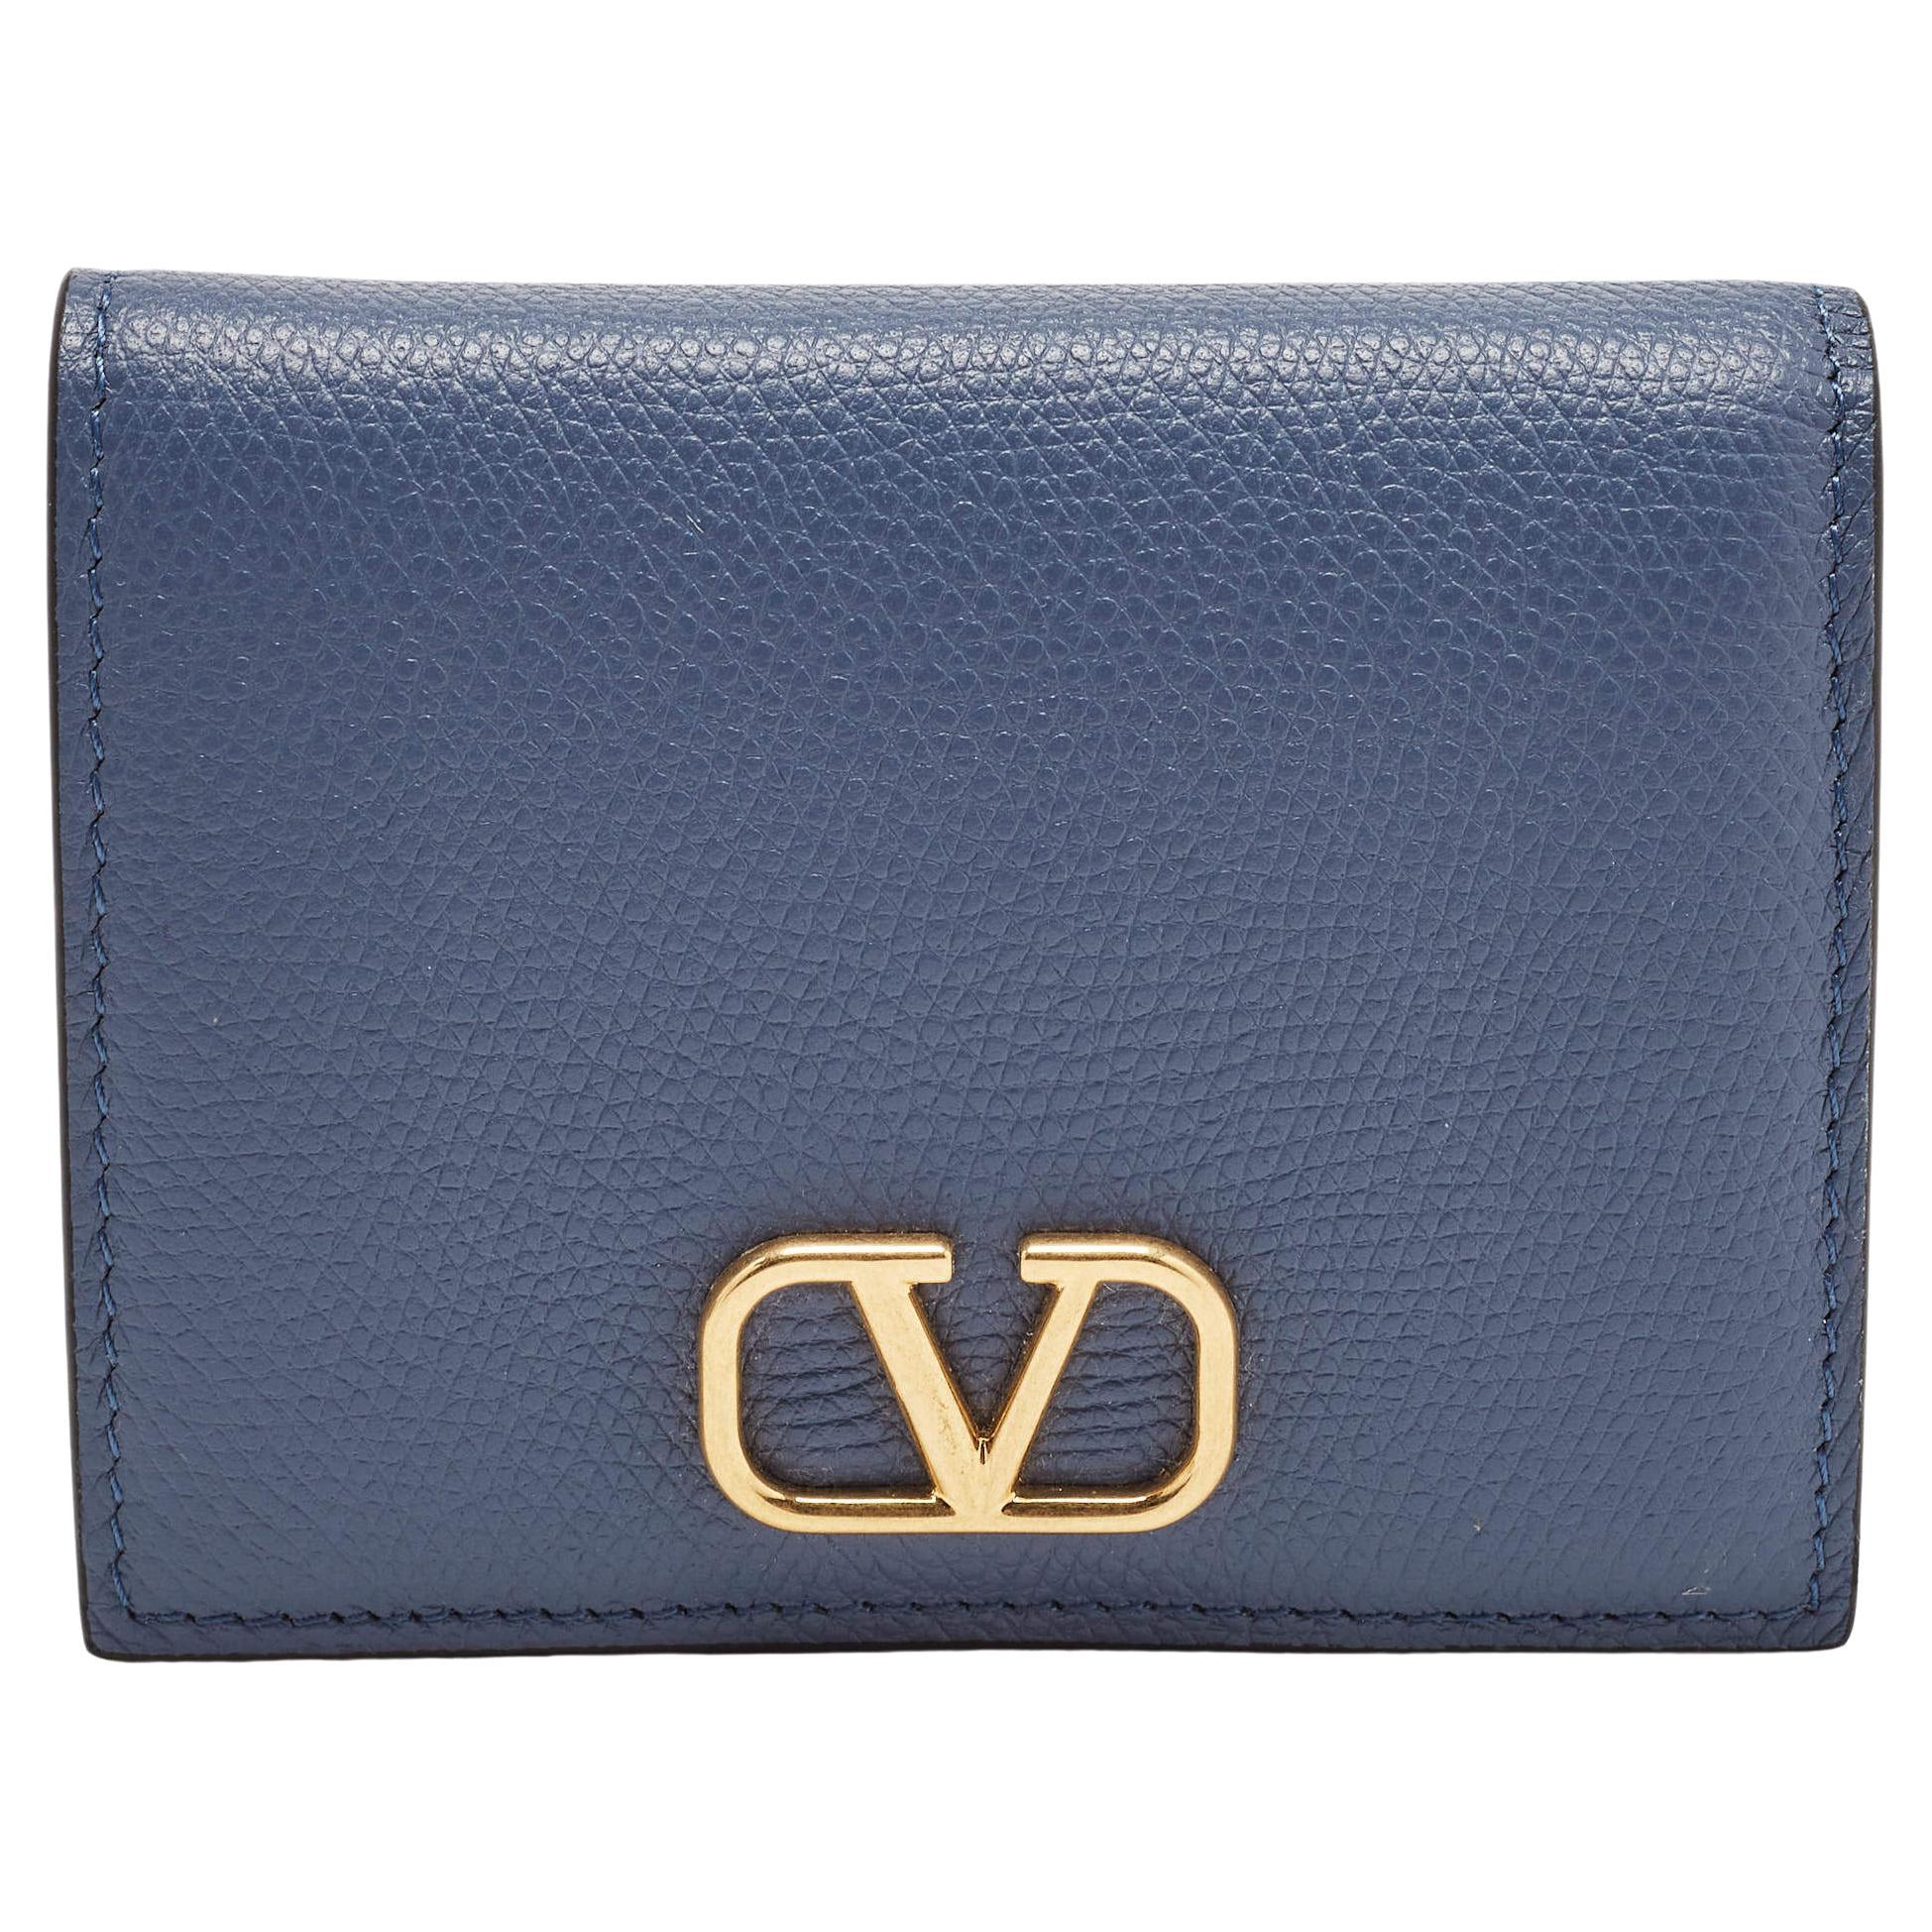 Valentino Blue Leather VLogo Compact Wallet